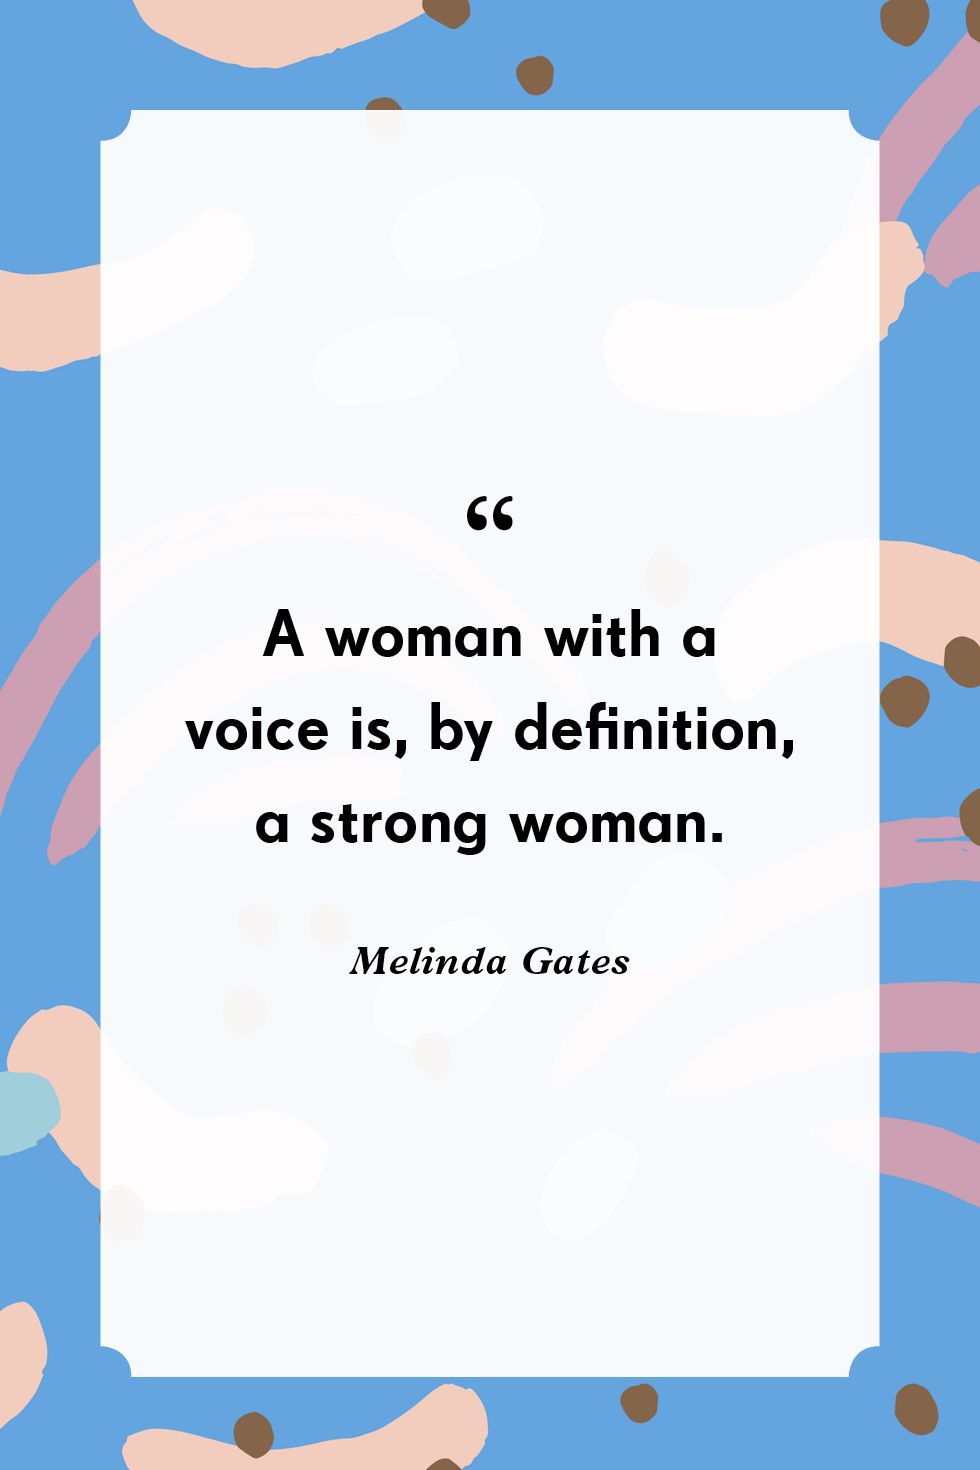 Incredible Compilation: Over 999 Women Quotes Images in Stunning 4K Resolution